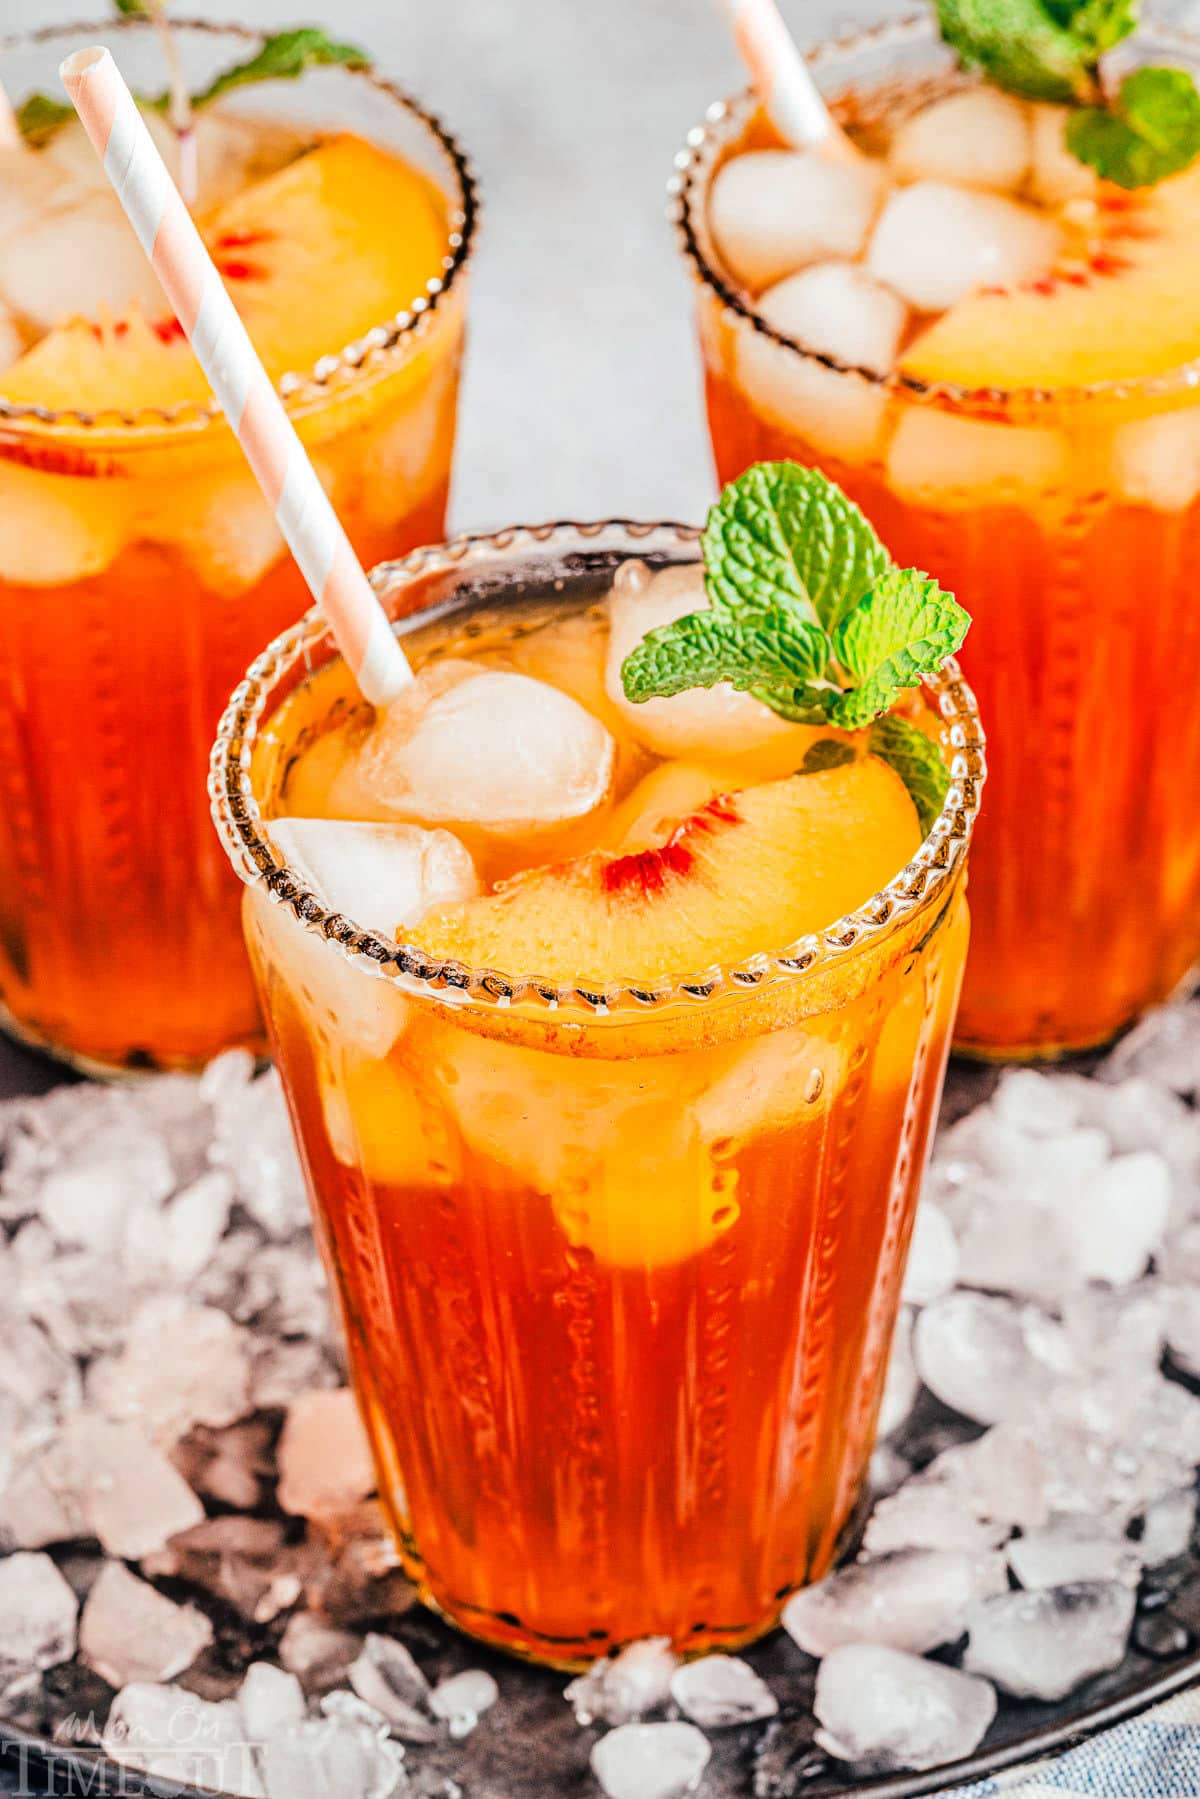 three tall glasses filled with homemade peach iced tea and topped with fresh peach slices and a sprig of mint. glasses are sitting on a tray covered with ice.